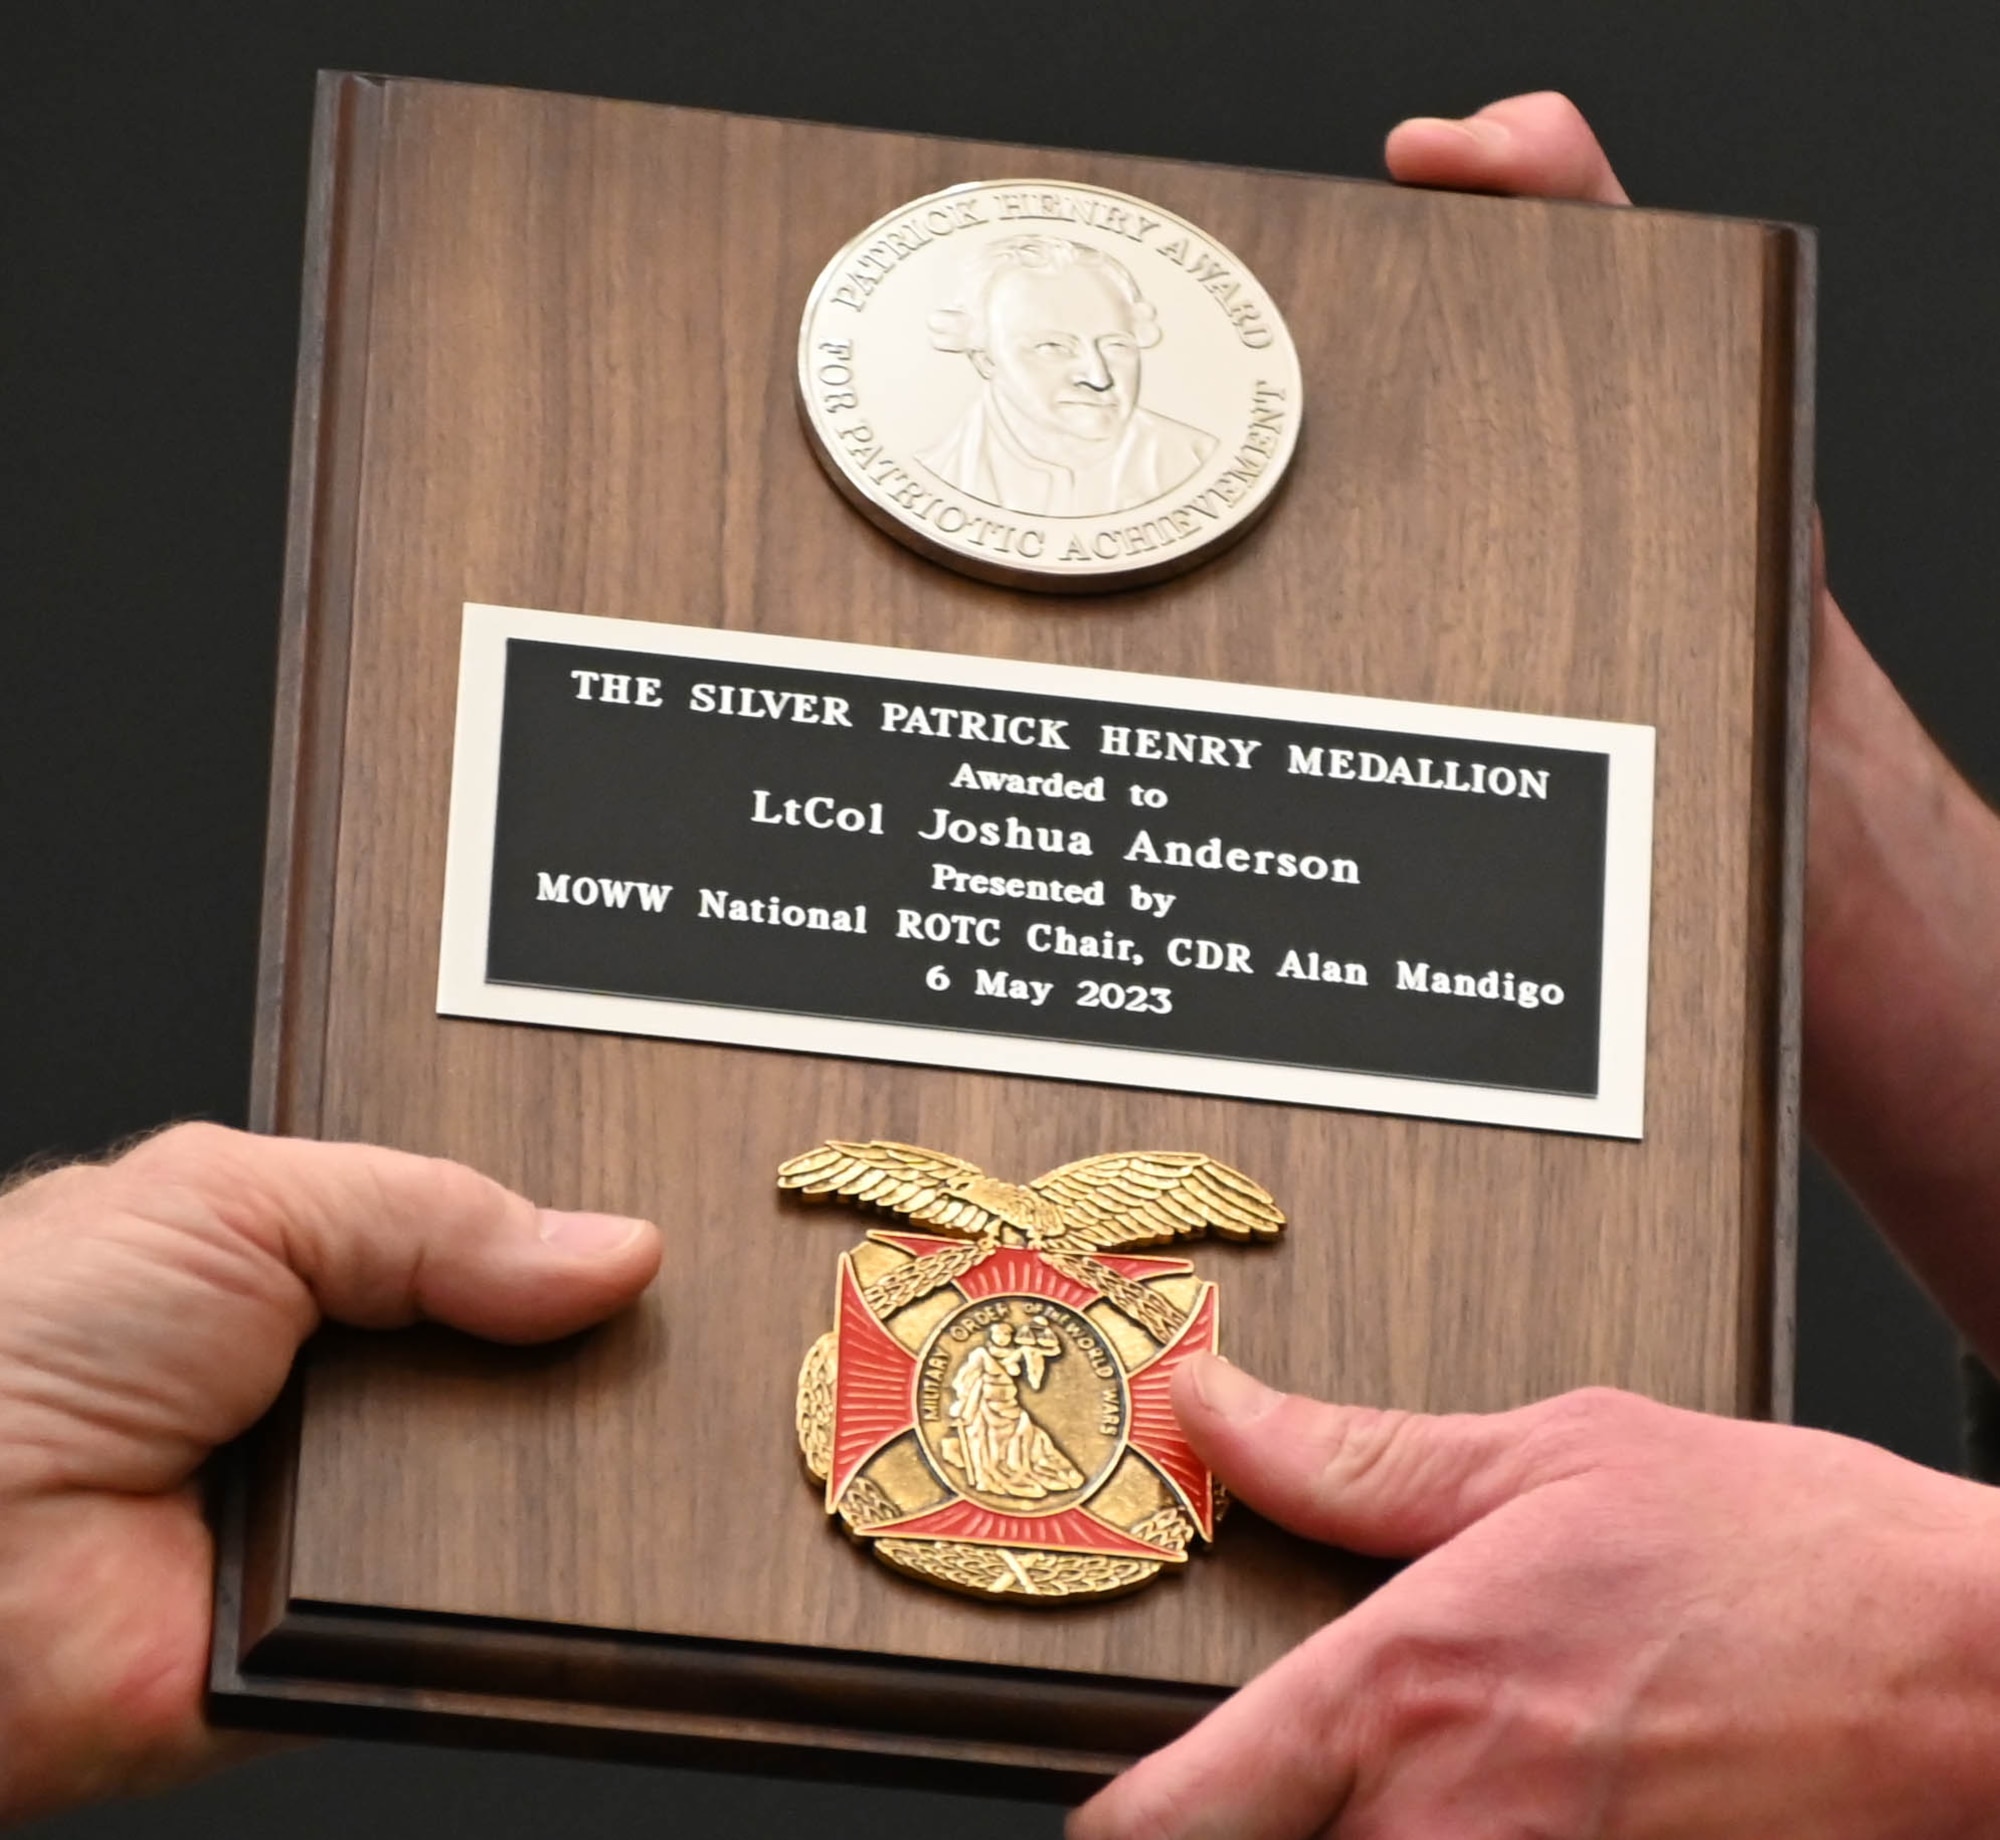 A pair of hands holding a wooden plaque that reads "The Silver Patrick Henry Medallion: Awarded to LtCol Joshua Anderson as presented by MOWW National ROTC Chair, CDR Alan Mandigo dated 6 May 2023"